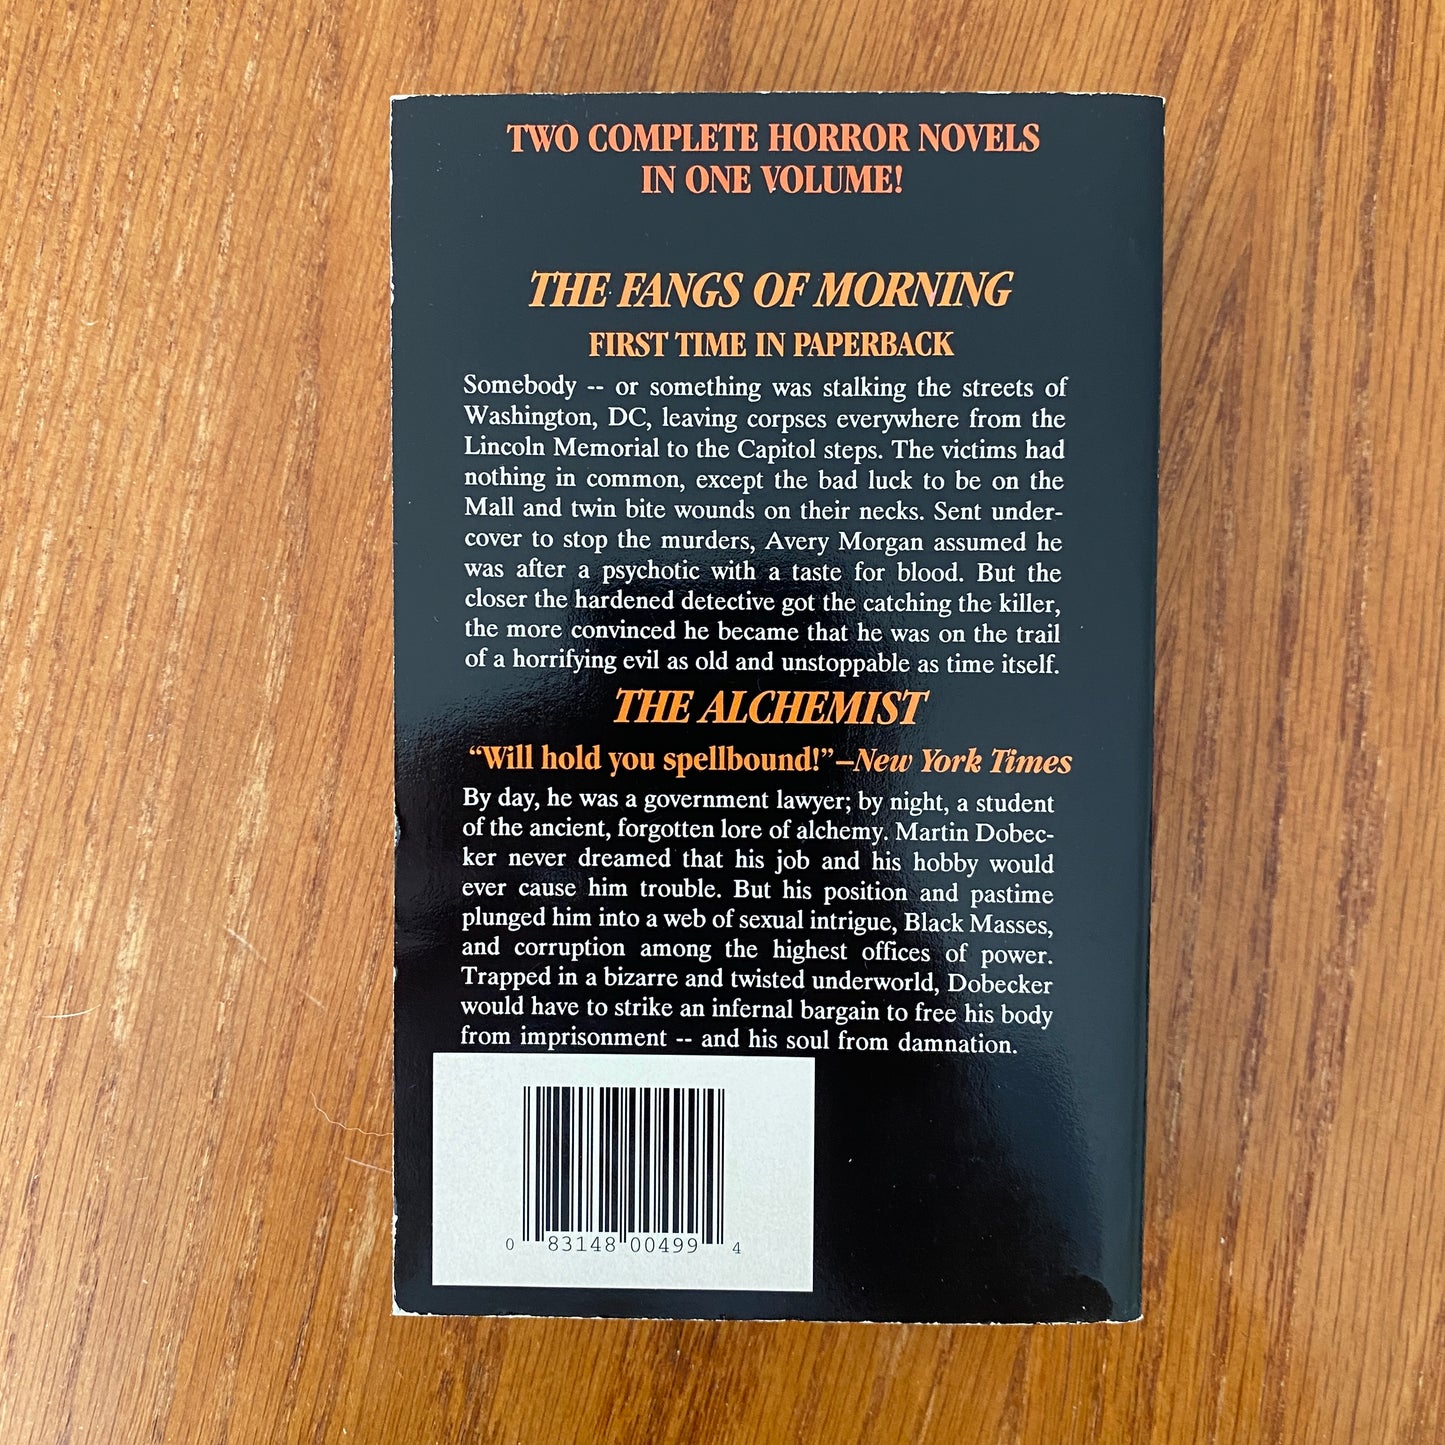 The Fangs Of Morning / The Alchemist - Leslieh H. Whitten